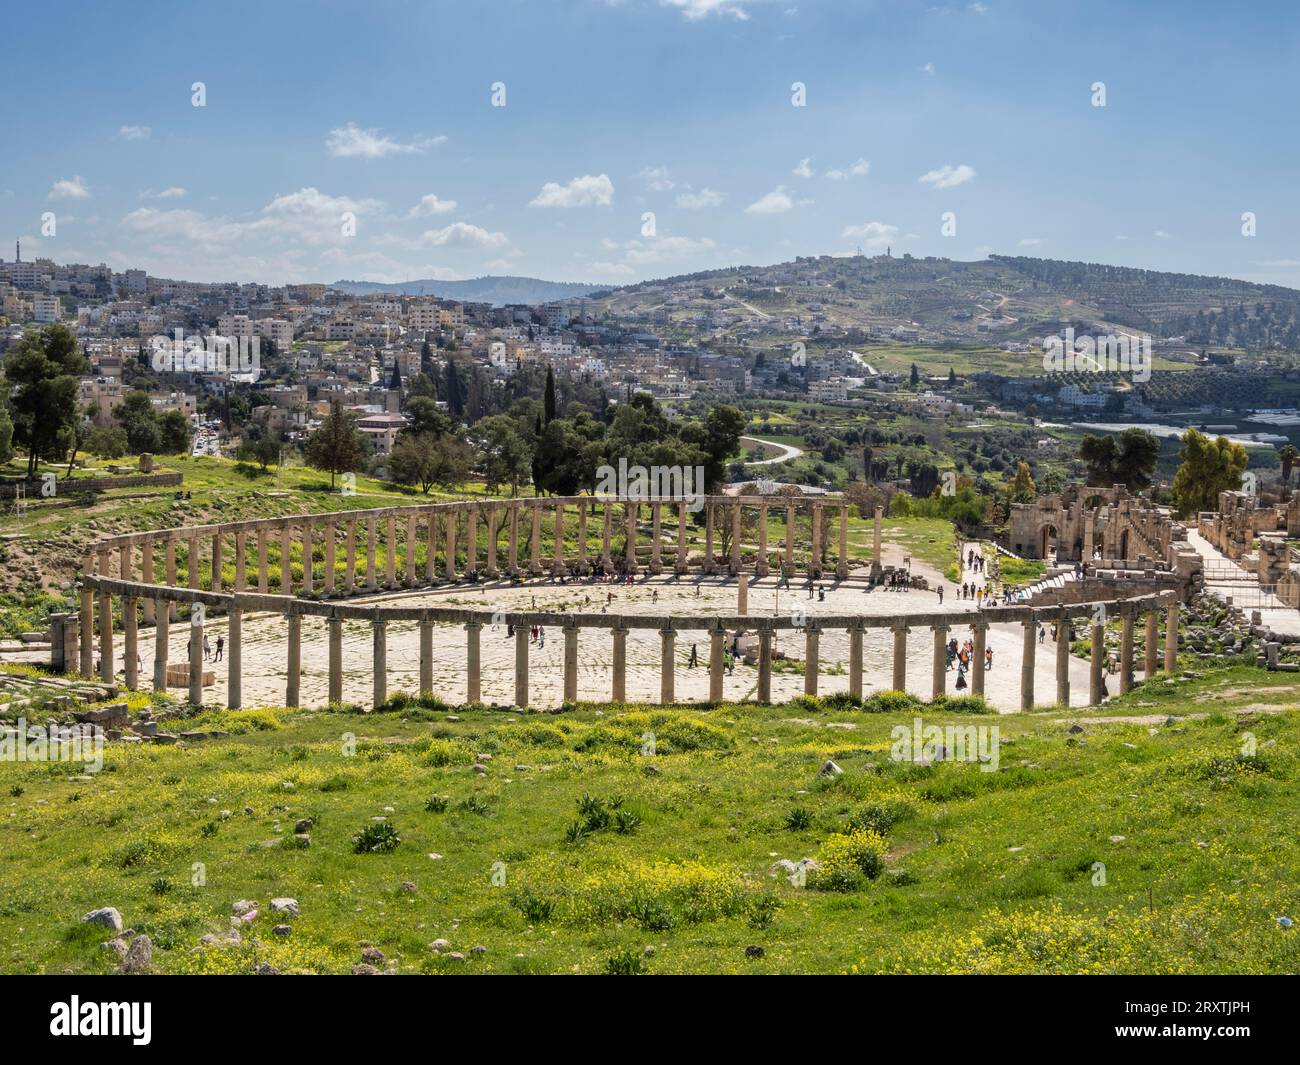 Columns in the Oval Plaza in the ancient city of Jerash, believed to be founded in 331 BC by Alexander the Great, Jerash, Jordan, Middle East Stock Photo